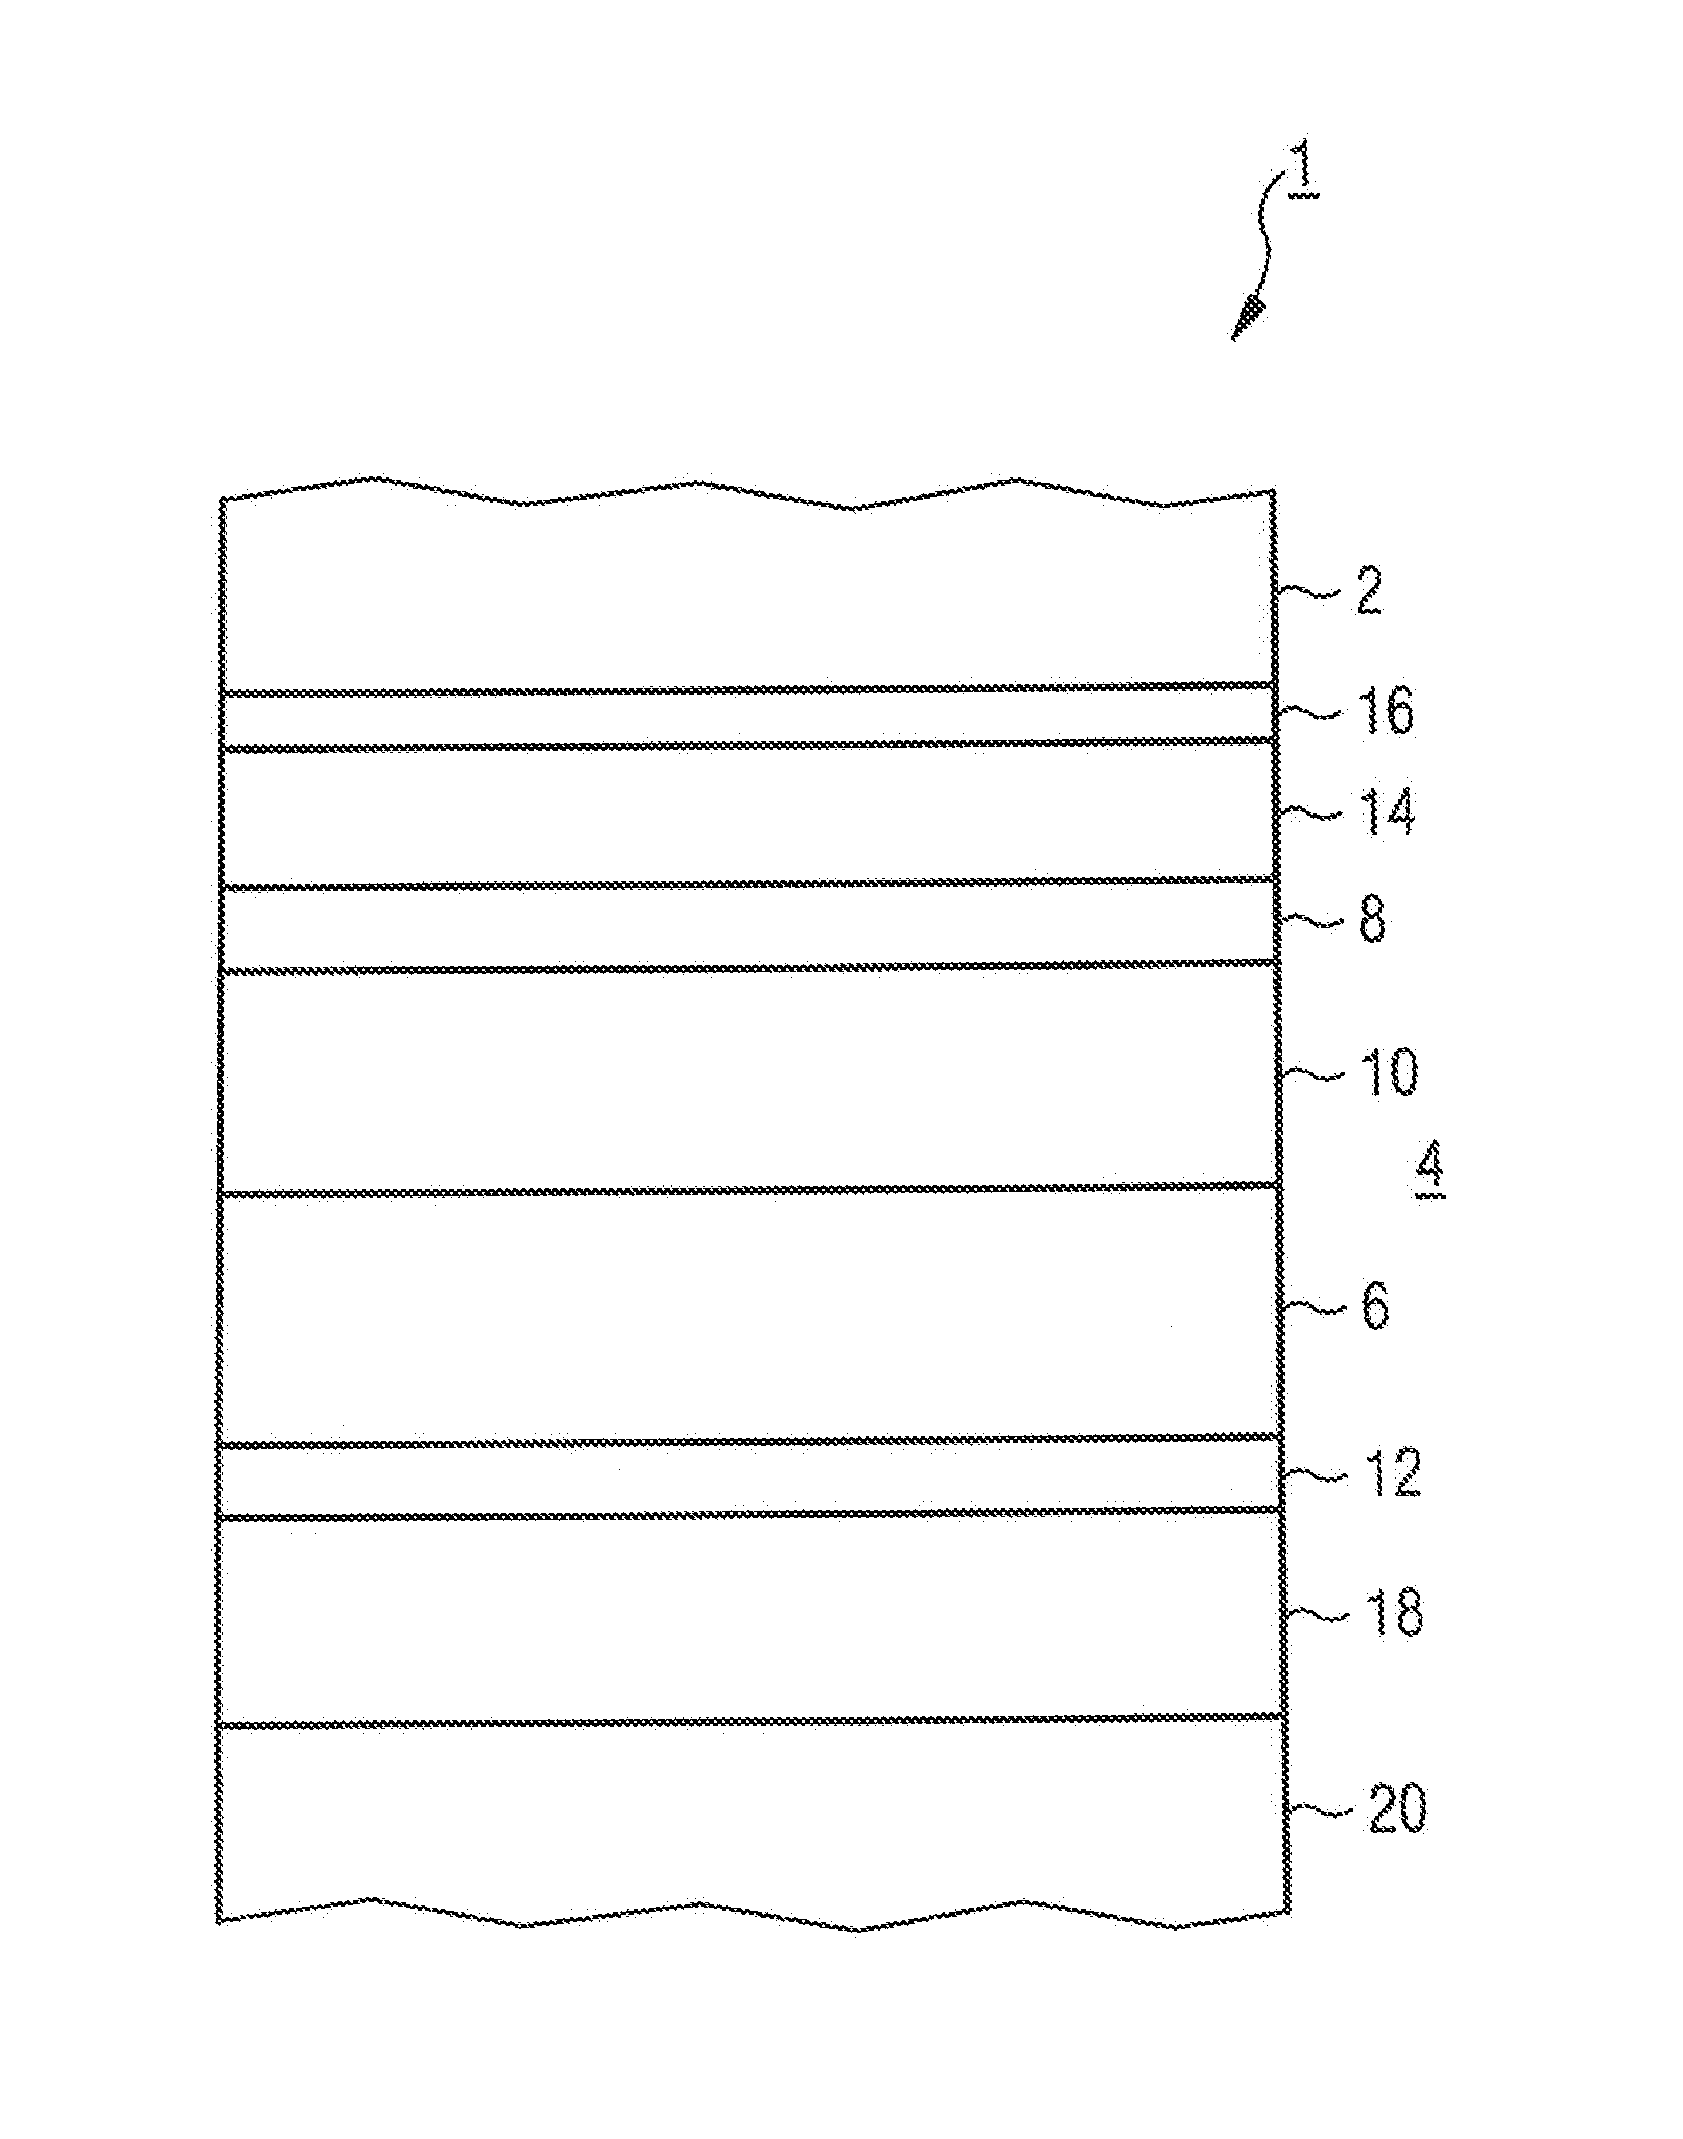 Method for producing a multilayer system on a carrier,
in particular in an electrochromic element